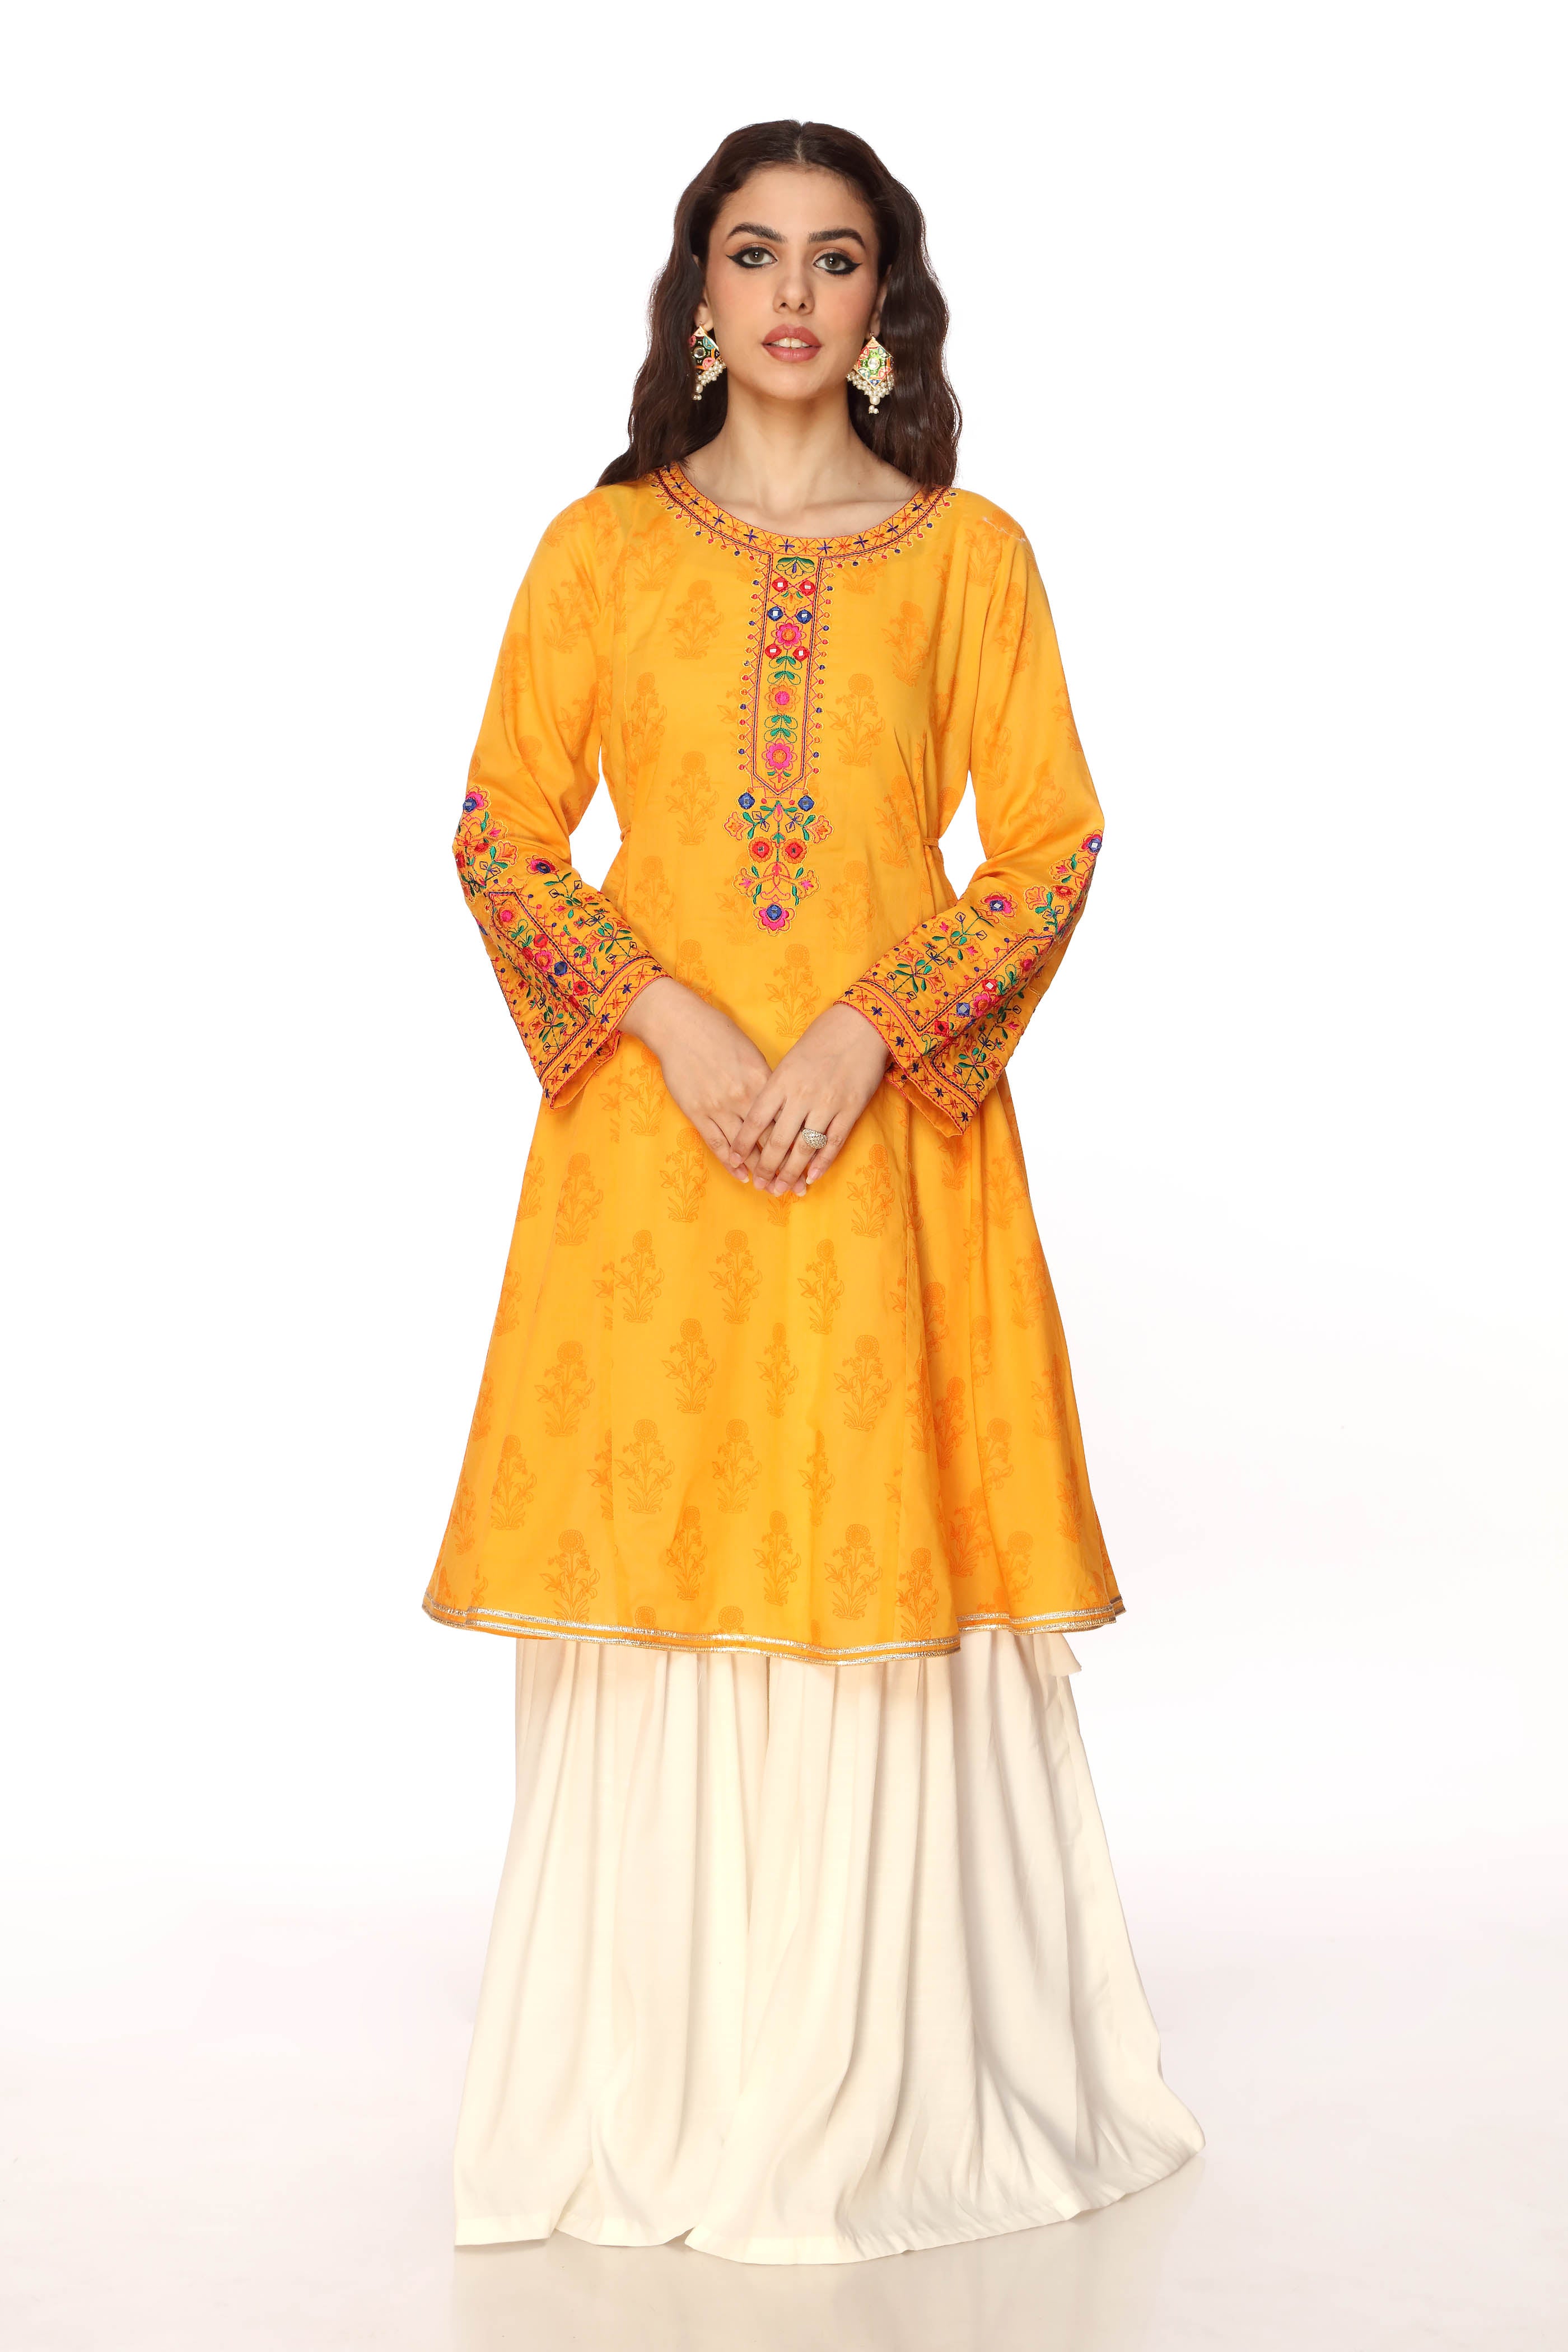 Sun Flower Ll in Yellow coloured Printed Lawn fabric